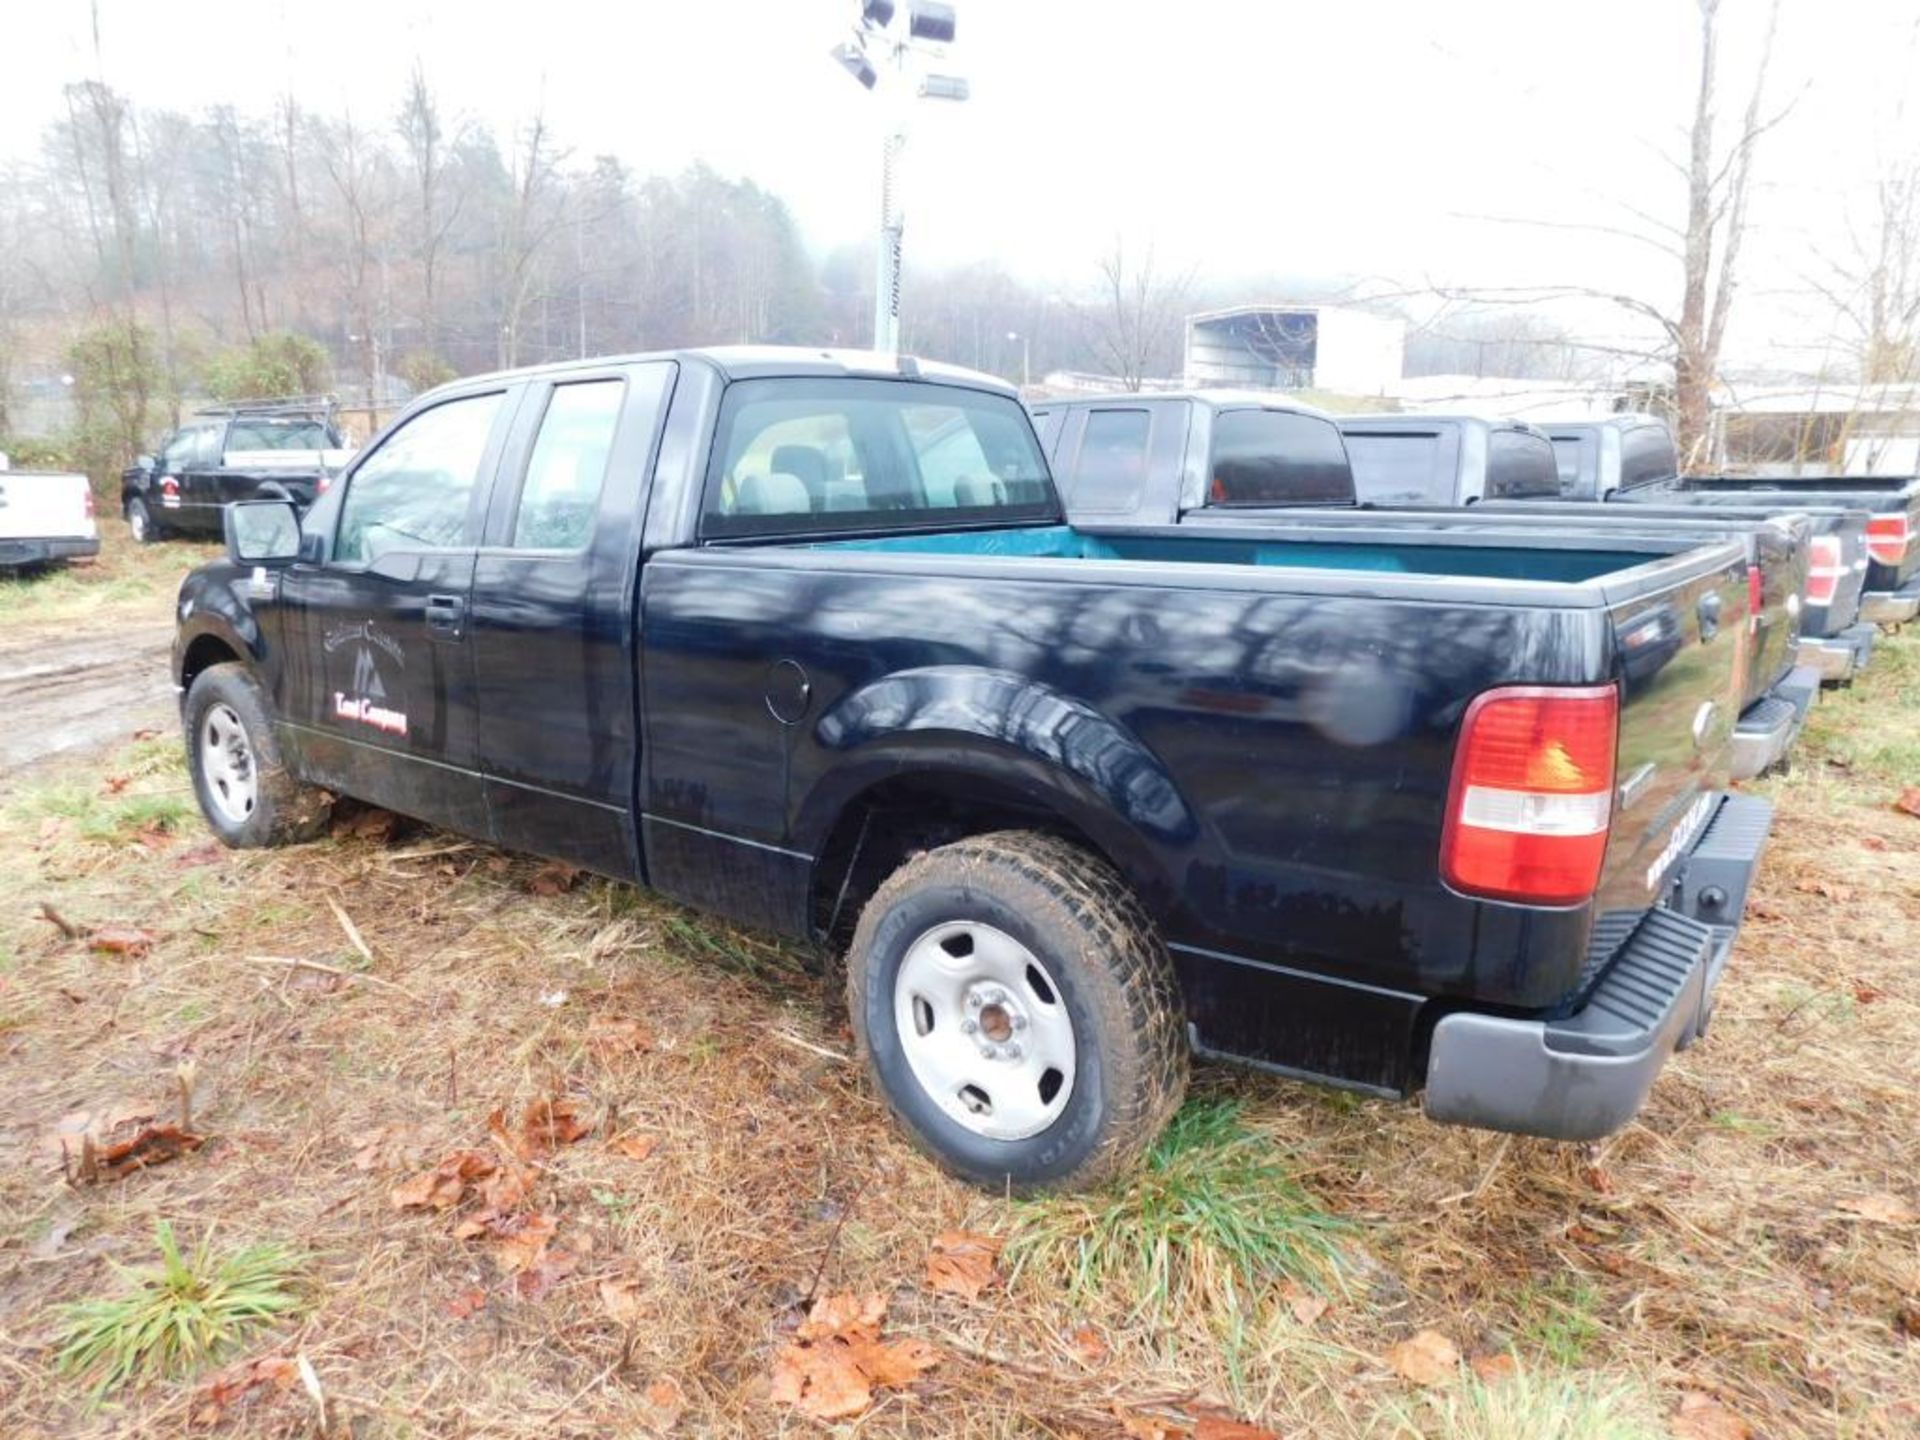 2008 Ford F150 XL Extended Cab, 2-Wheel Drive, 4.6 Liter, V8, Gasoline Motor, Auto, 6'6" Bed, 245,16 - Image 4 of 7